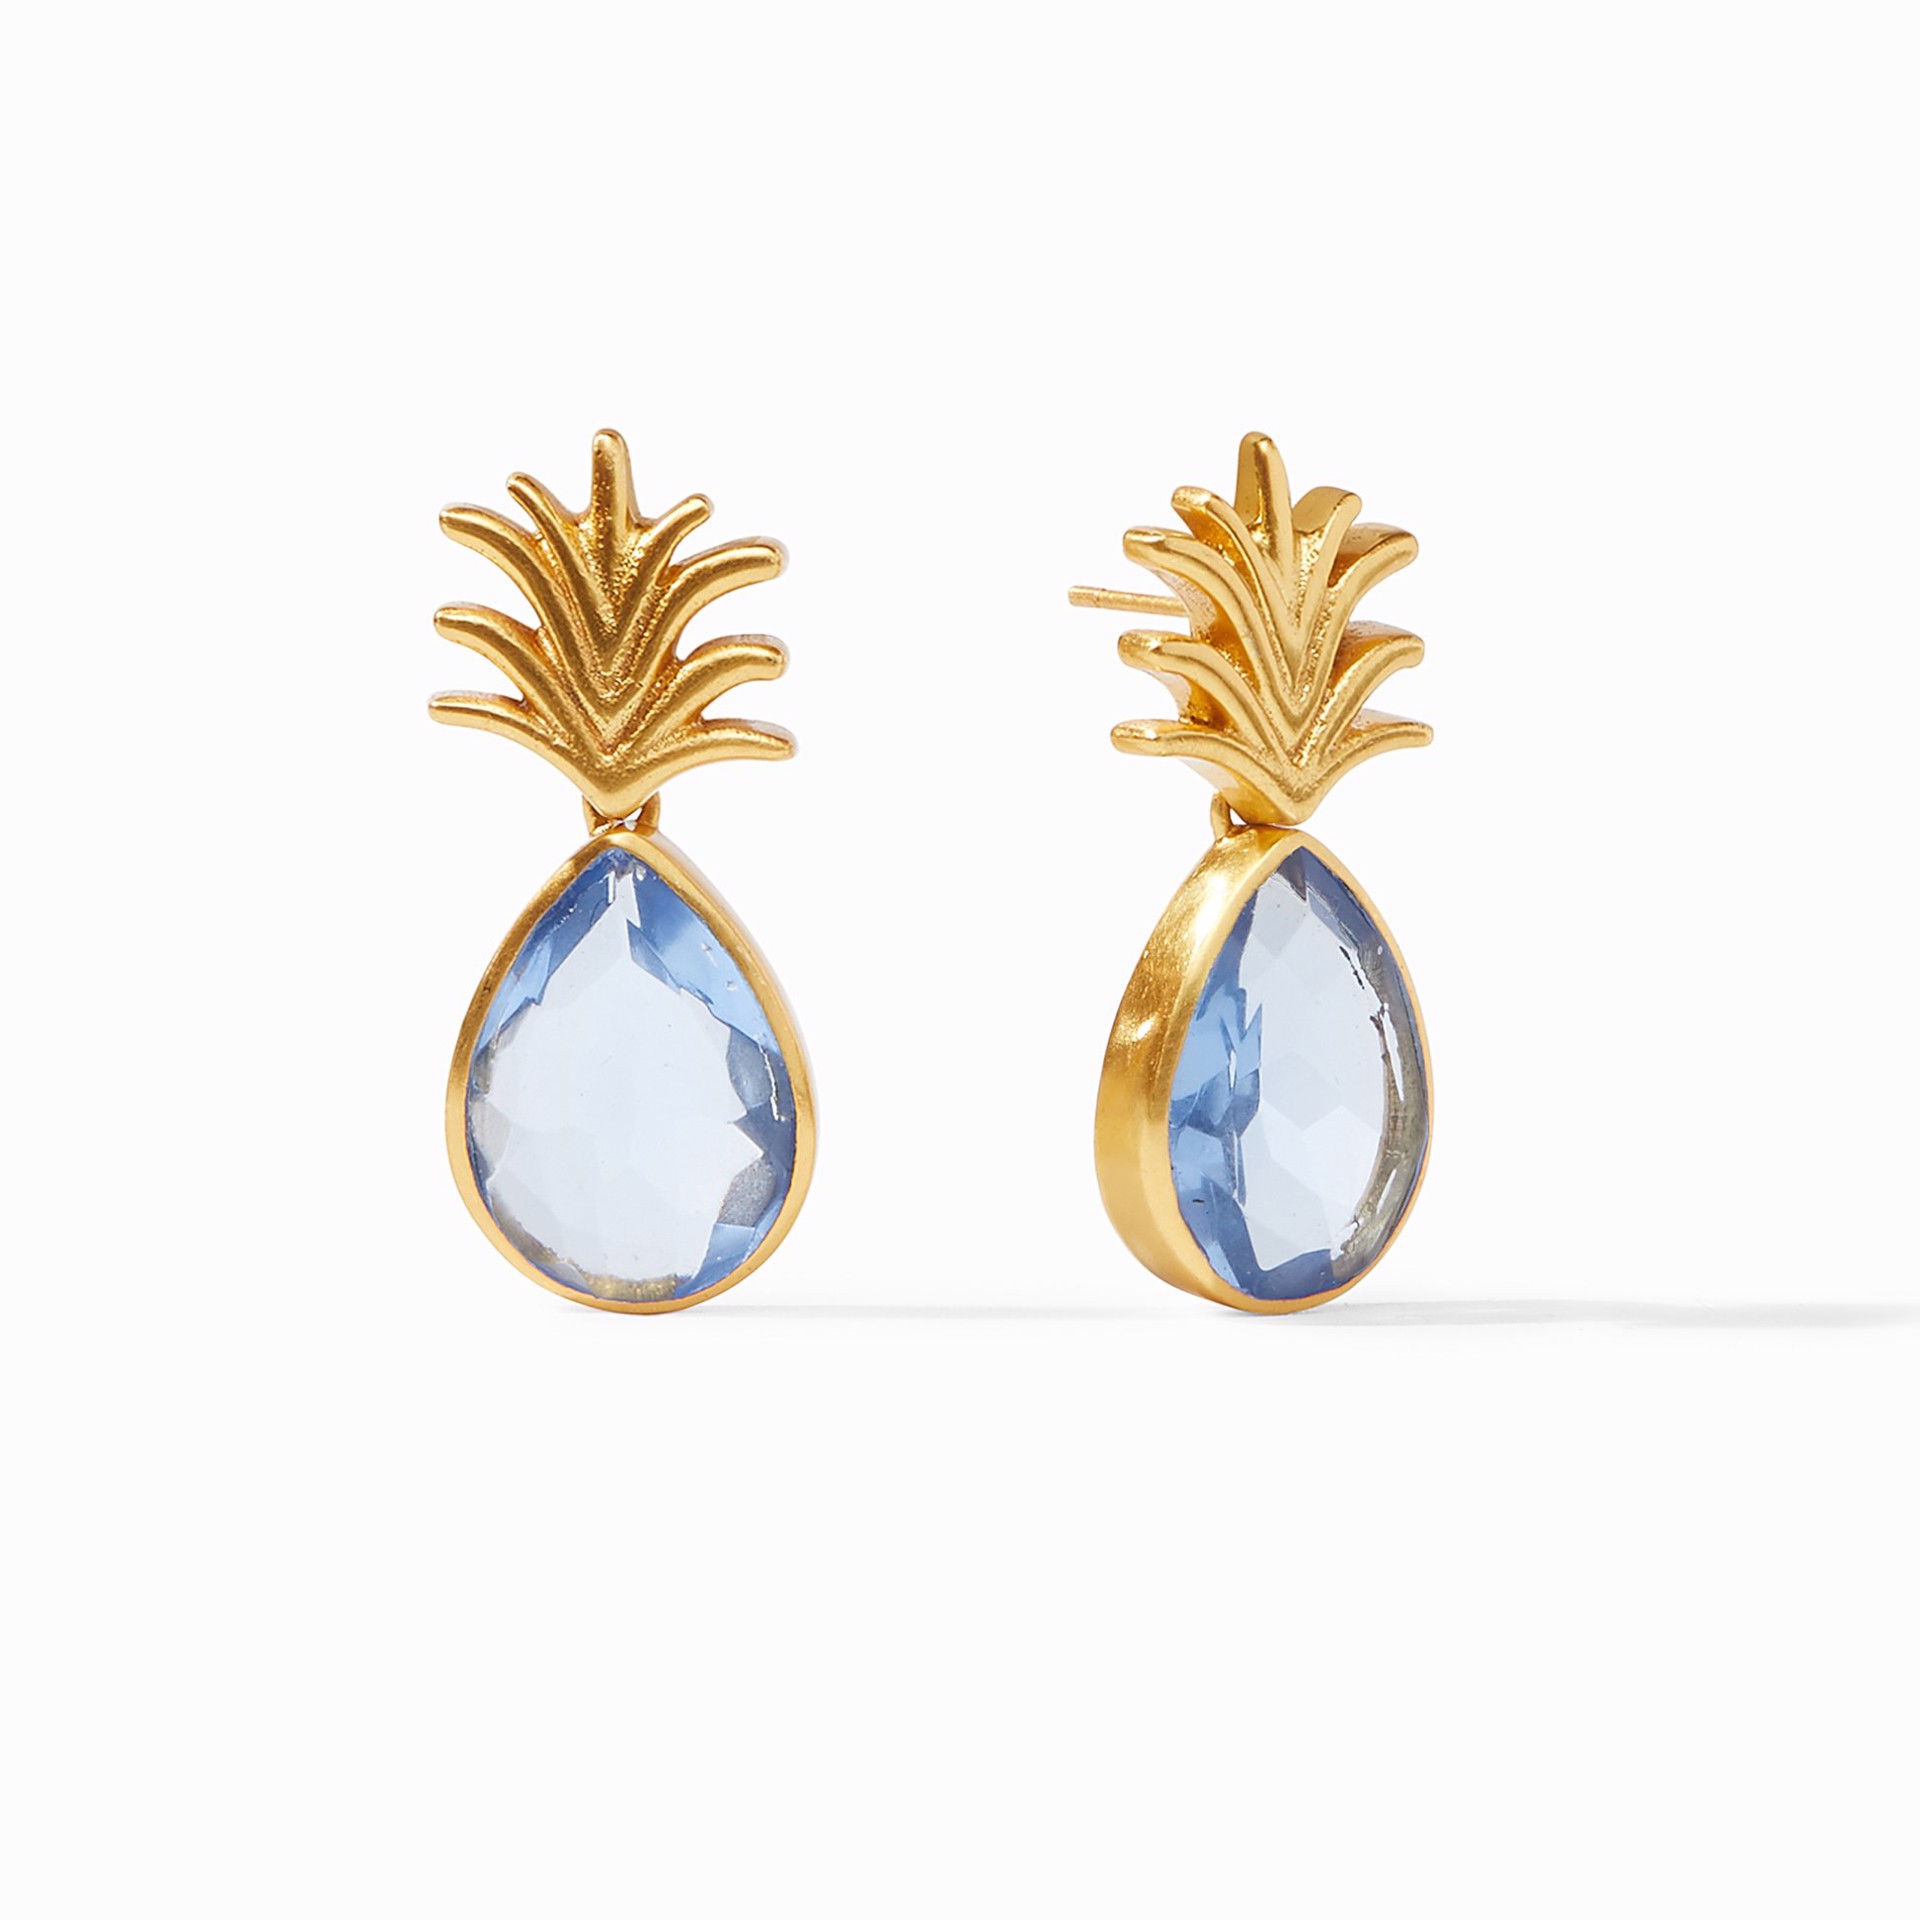 Pineapple Earring - Chalcedony Blue by Julie Vos